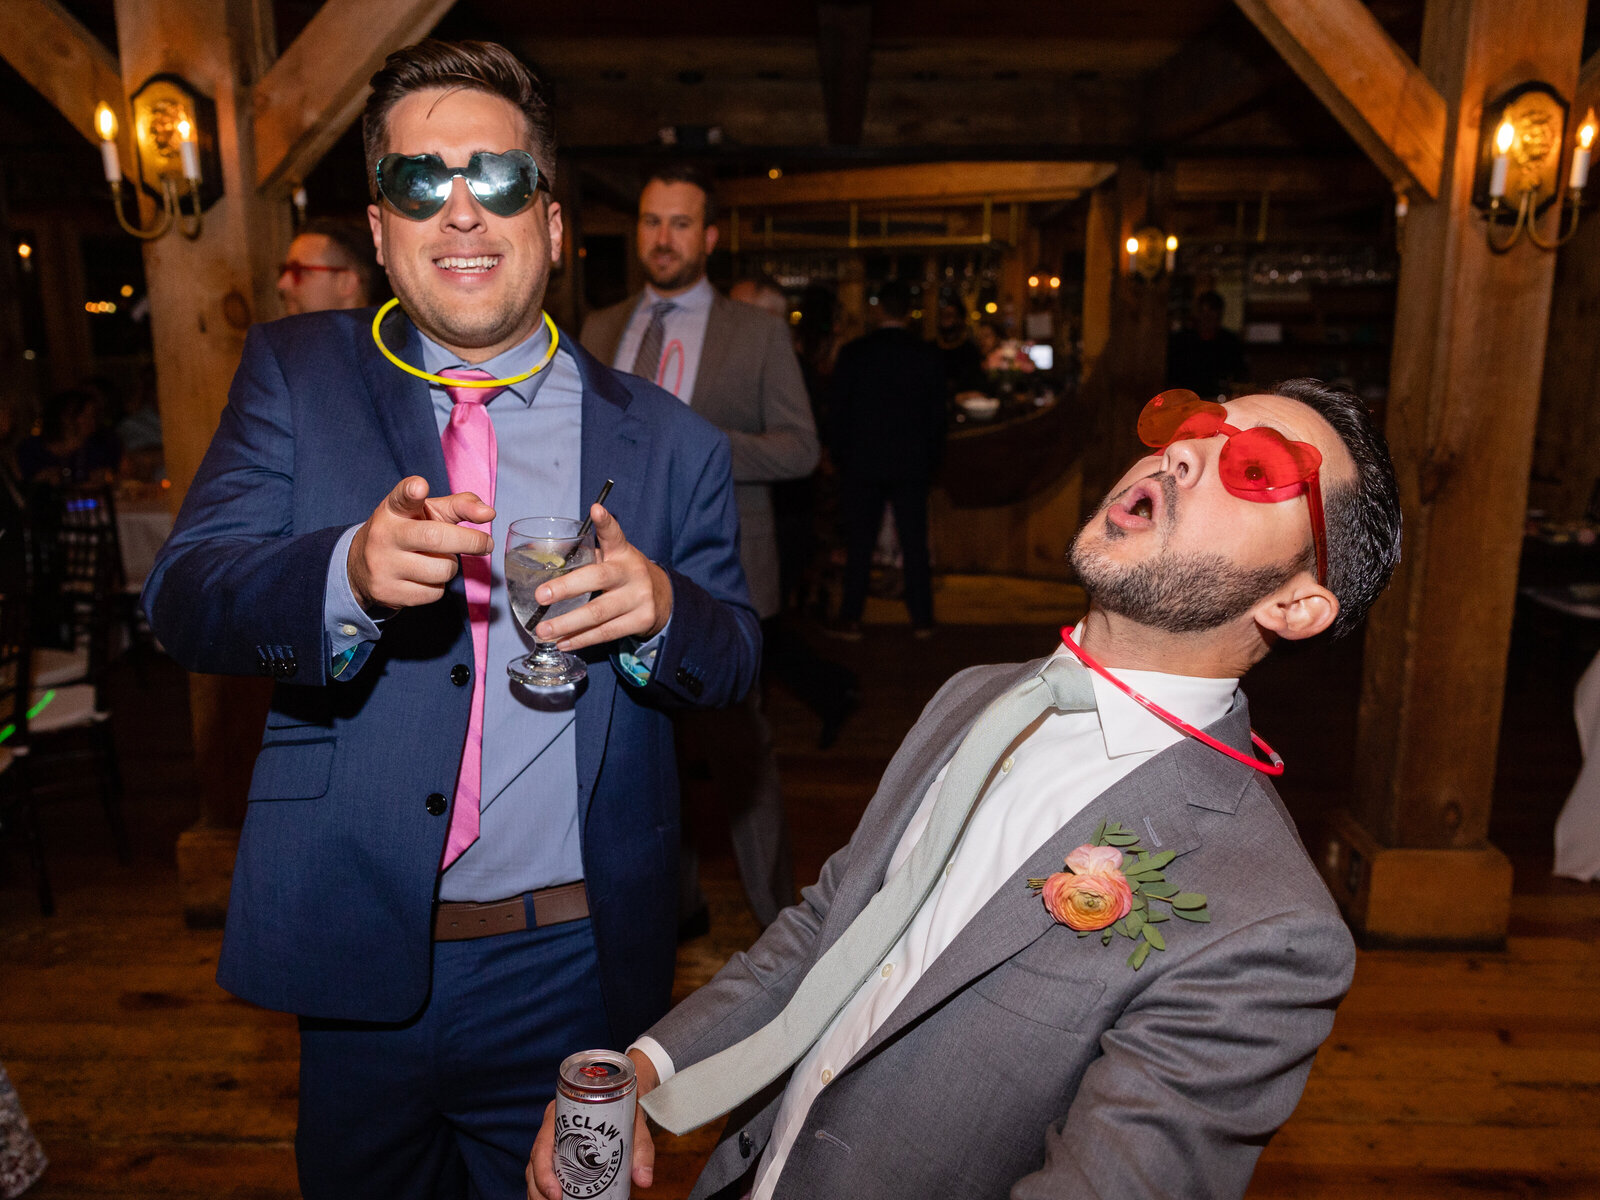 guest with novelty glasses dancing at wedding